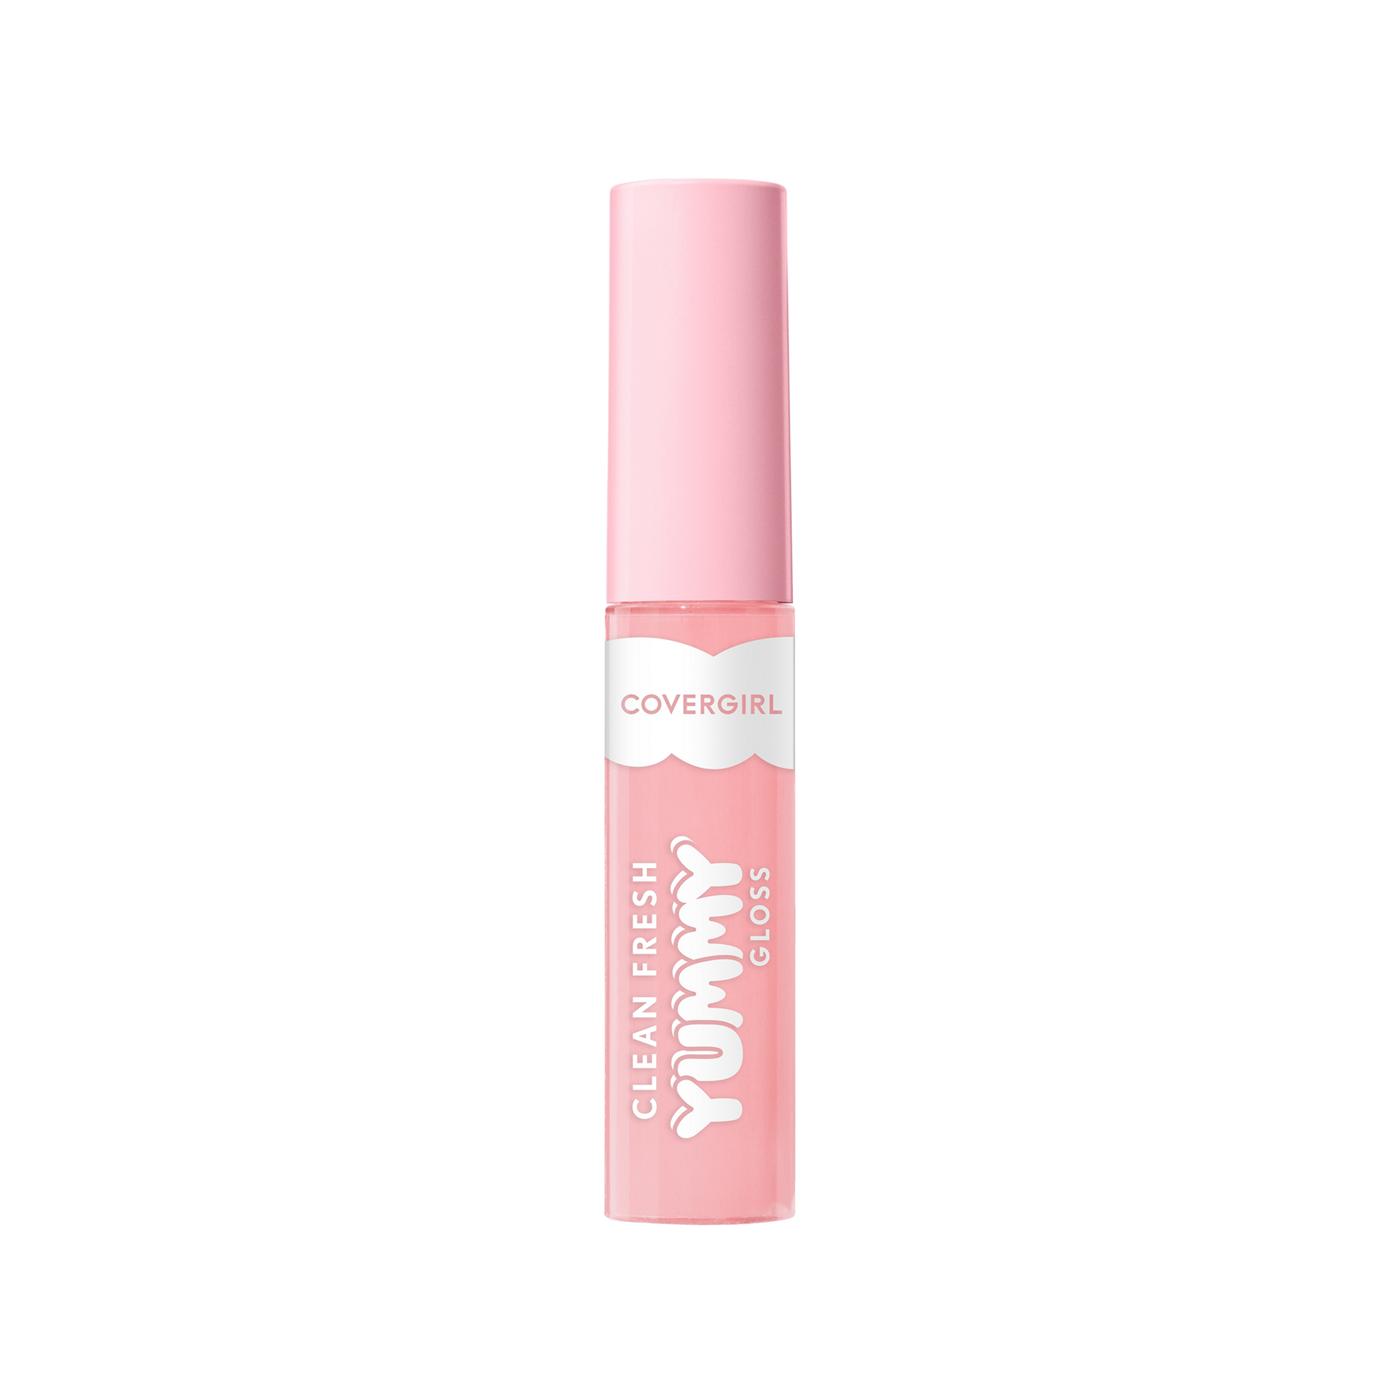 Covergirl Clean Fresh Yummy Lip Gloss - Coconuts About You; image 10 of 10